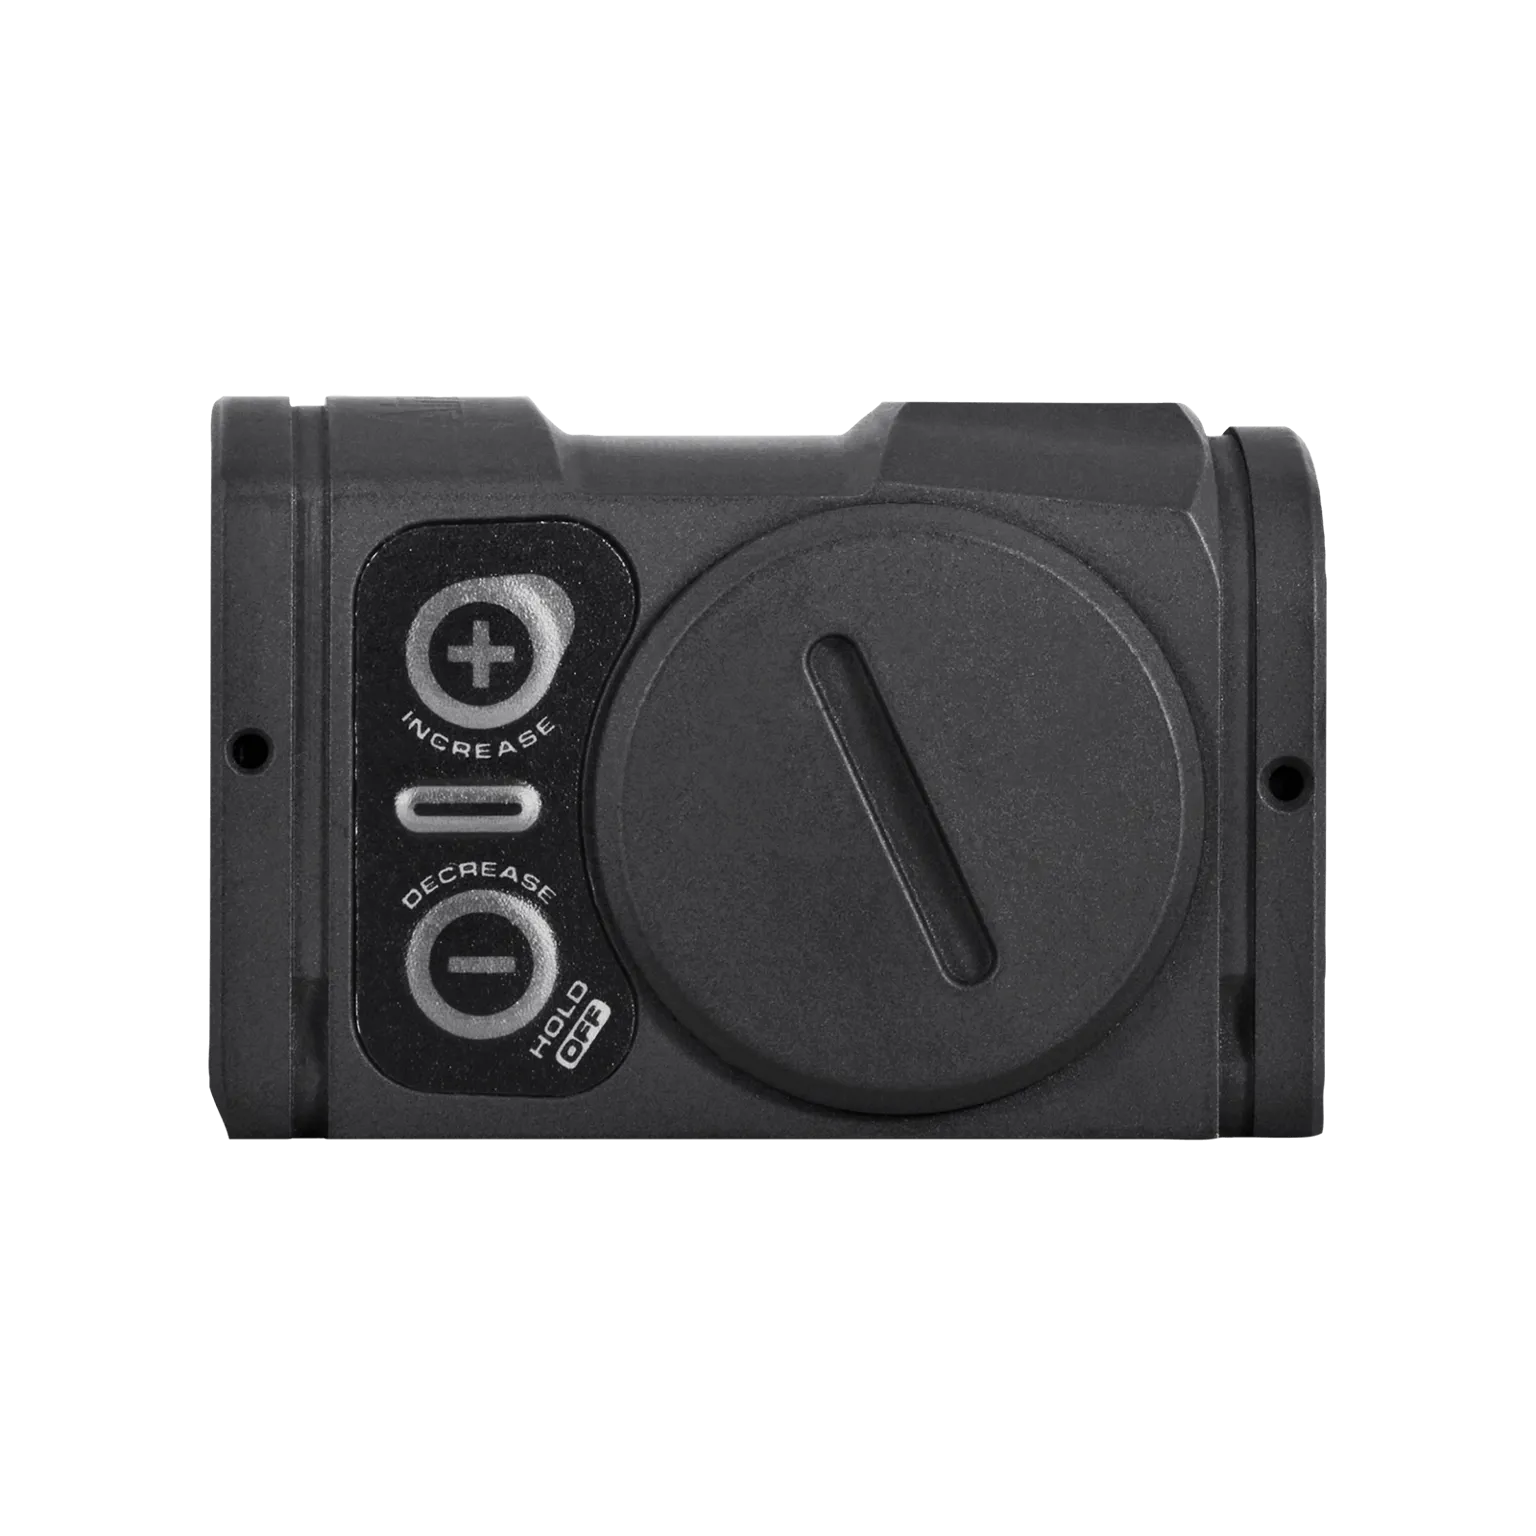 Acro P-2™ Sniper Grey 3.5 MOA - Red dot reflex sight with integrated Acro™ interface - 4